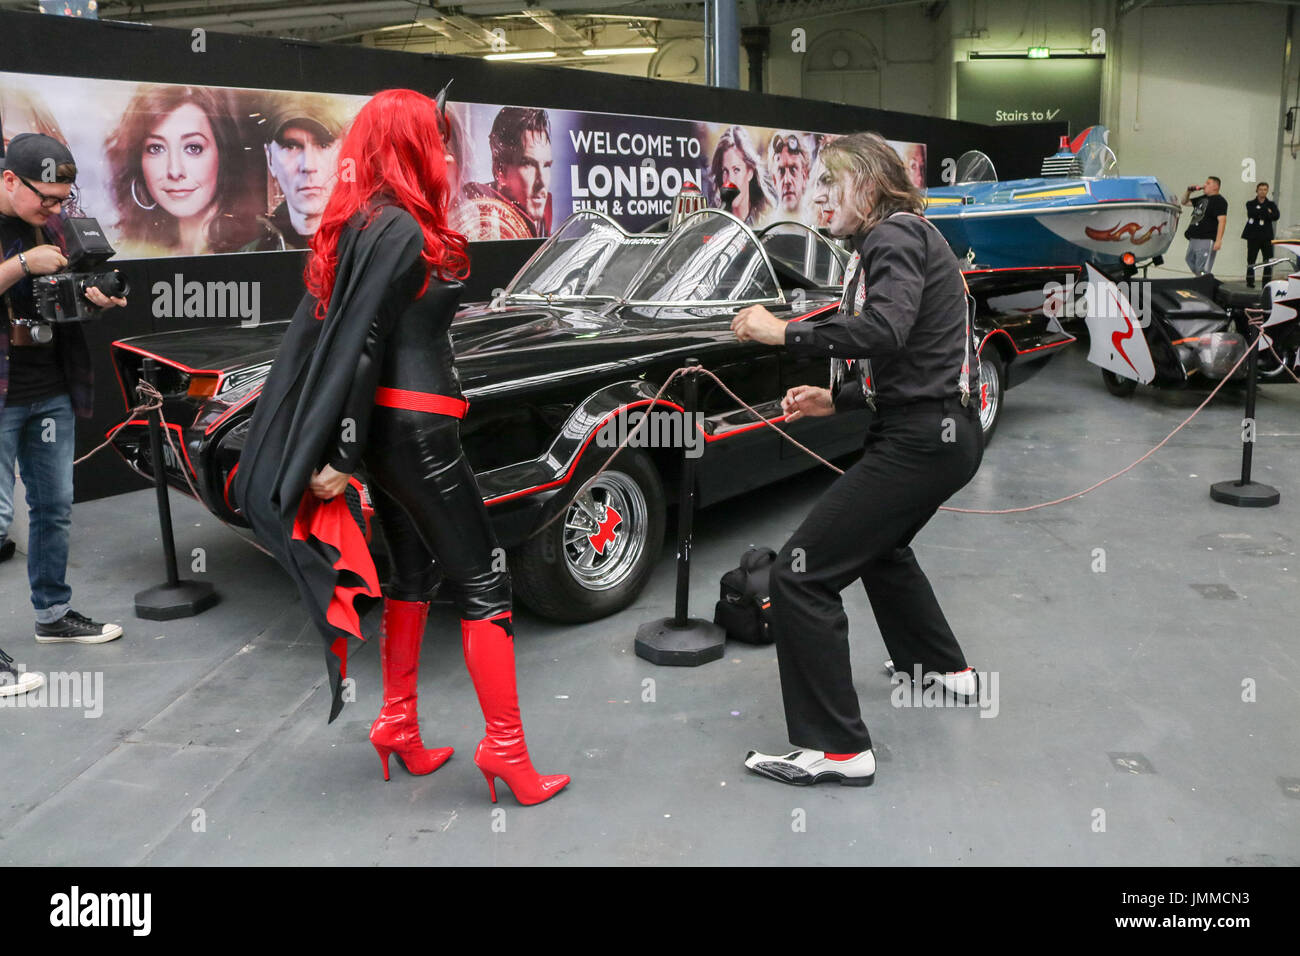 London, UK. 28th July, 2017. People dress up in their favourite character costumes at the annual London film and comic convention in Olympia which focuses on films, cult television, gaming, anime, cosplay and comics Credit: amer ghazzal/Alamy Live News Stock Photo